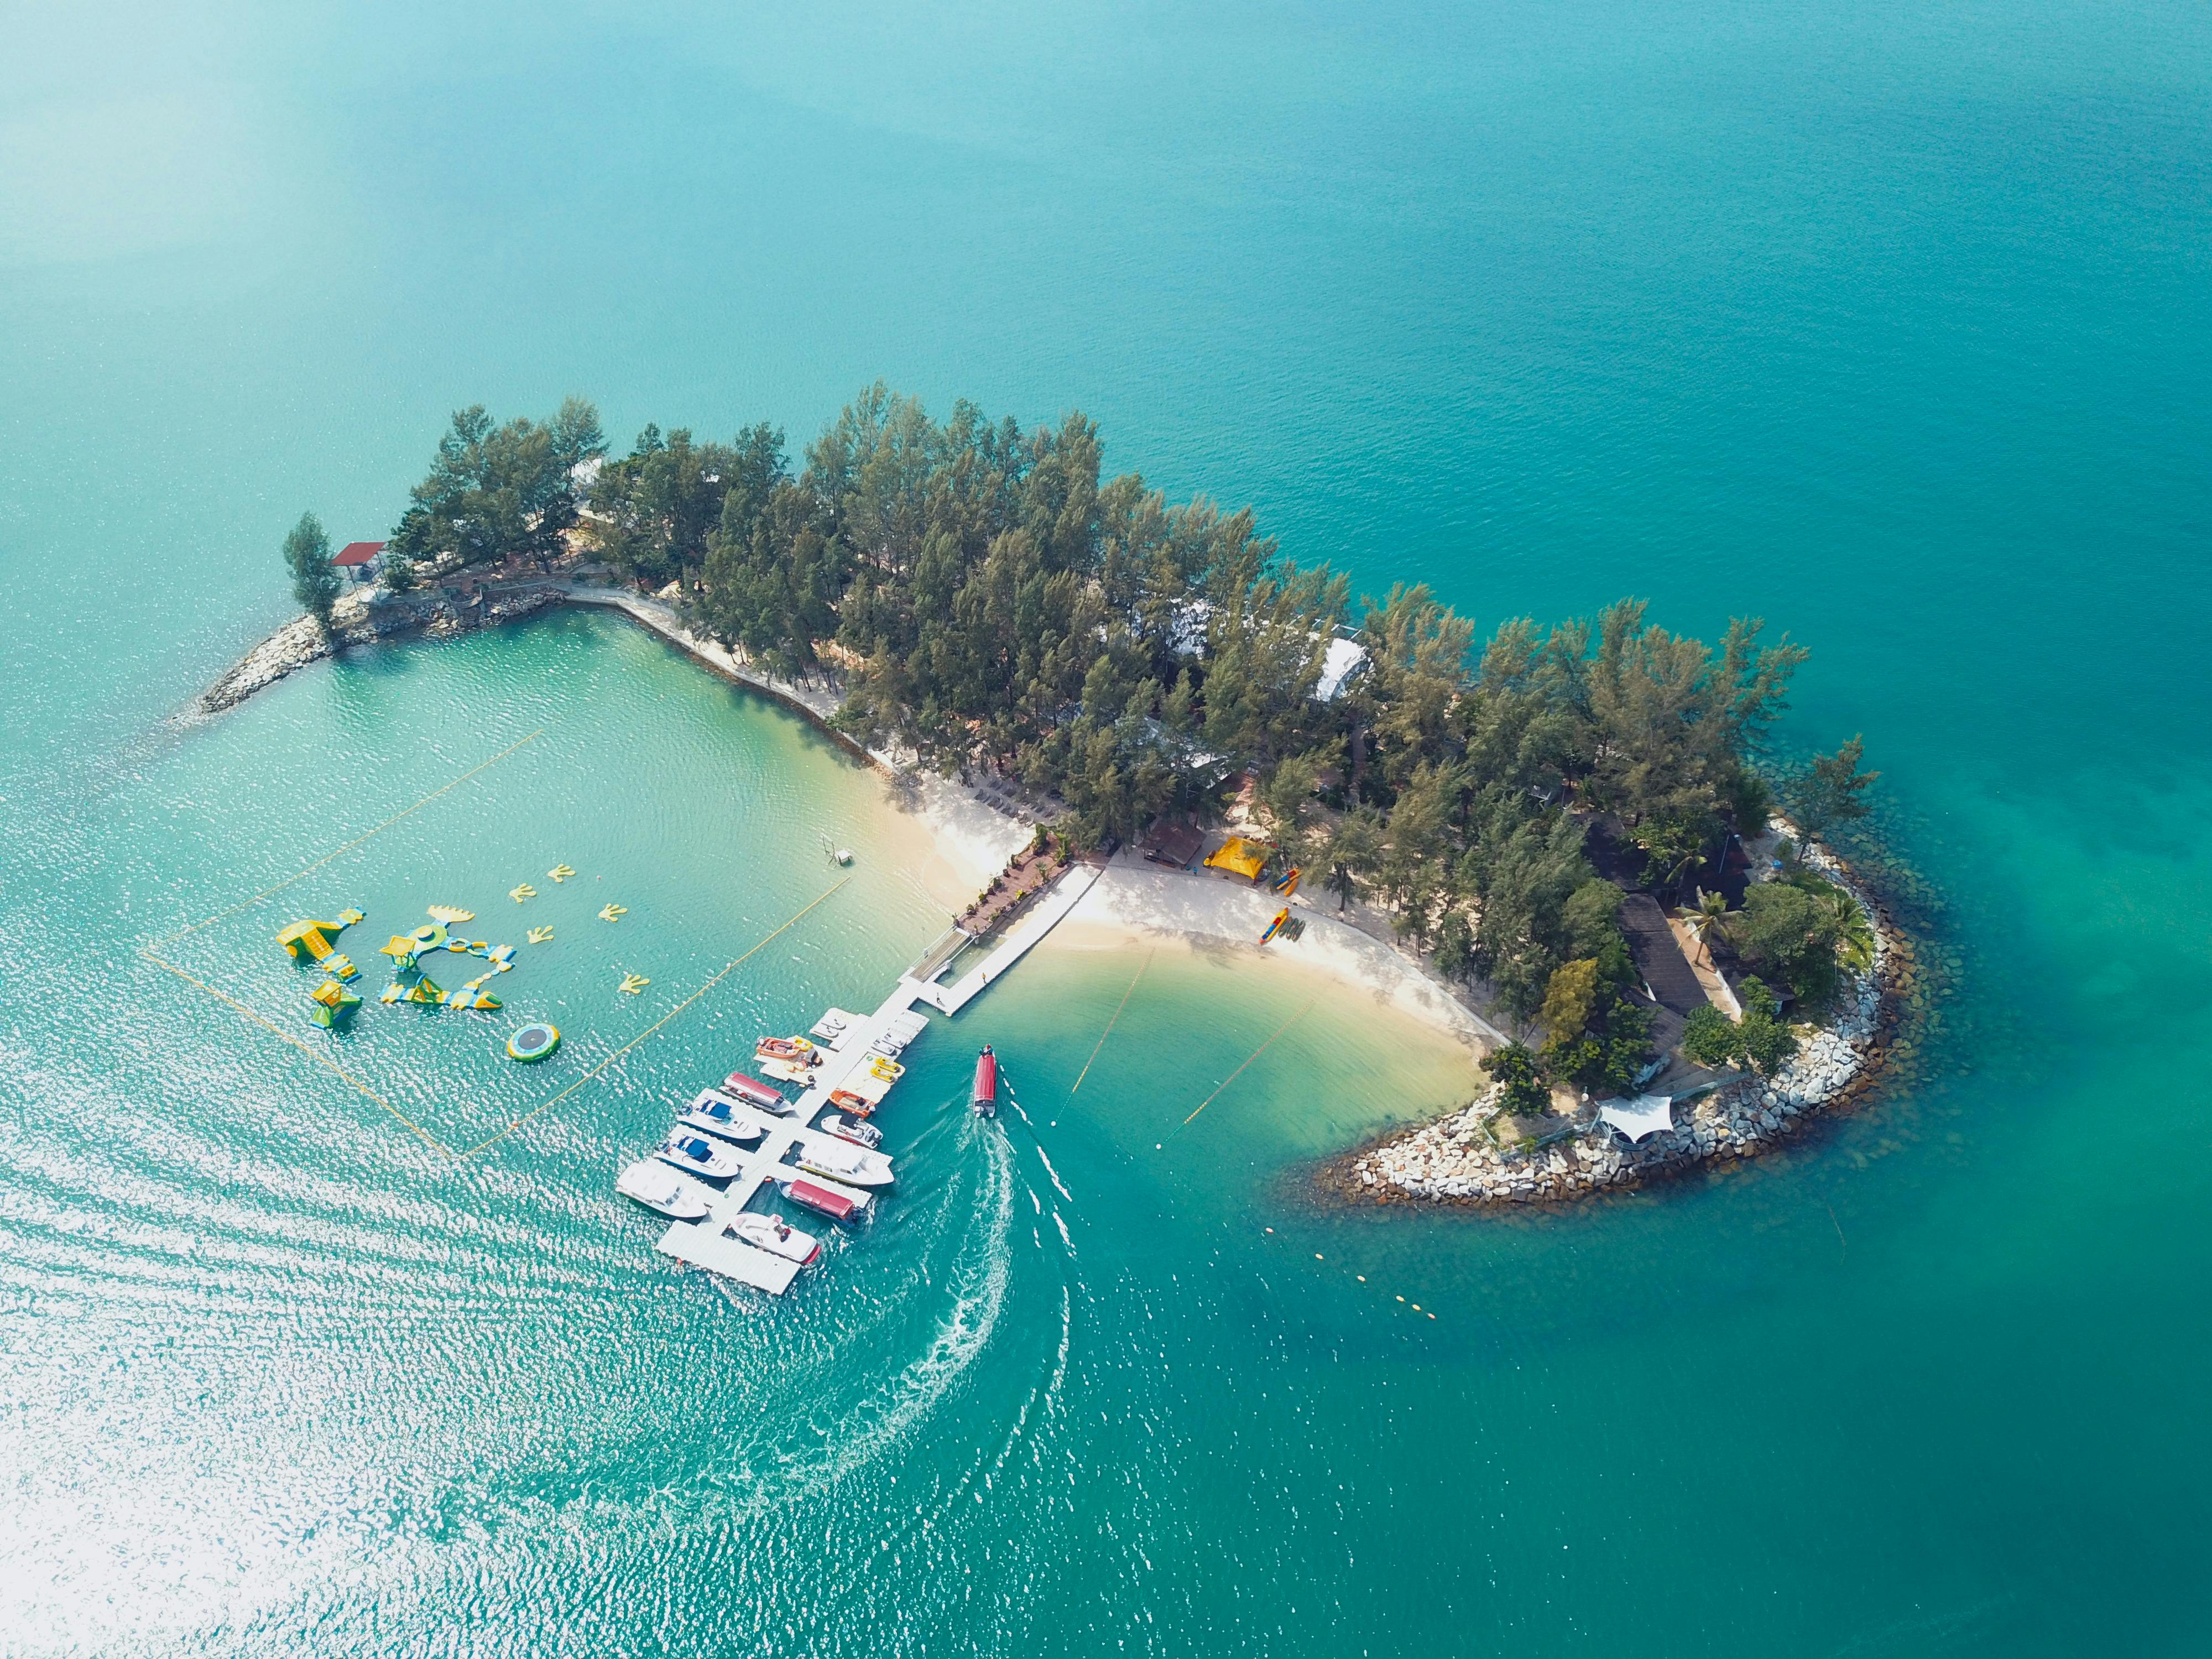 Full-day Silver access to Paradise 101 in langkawi